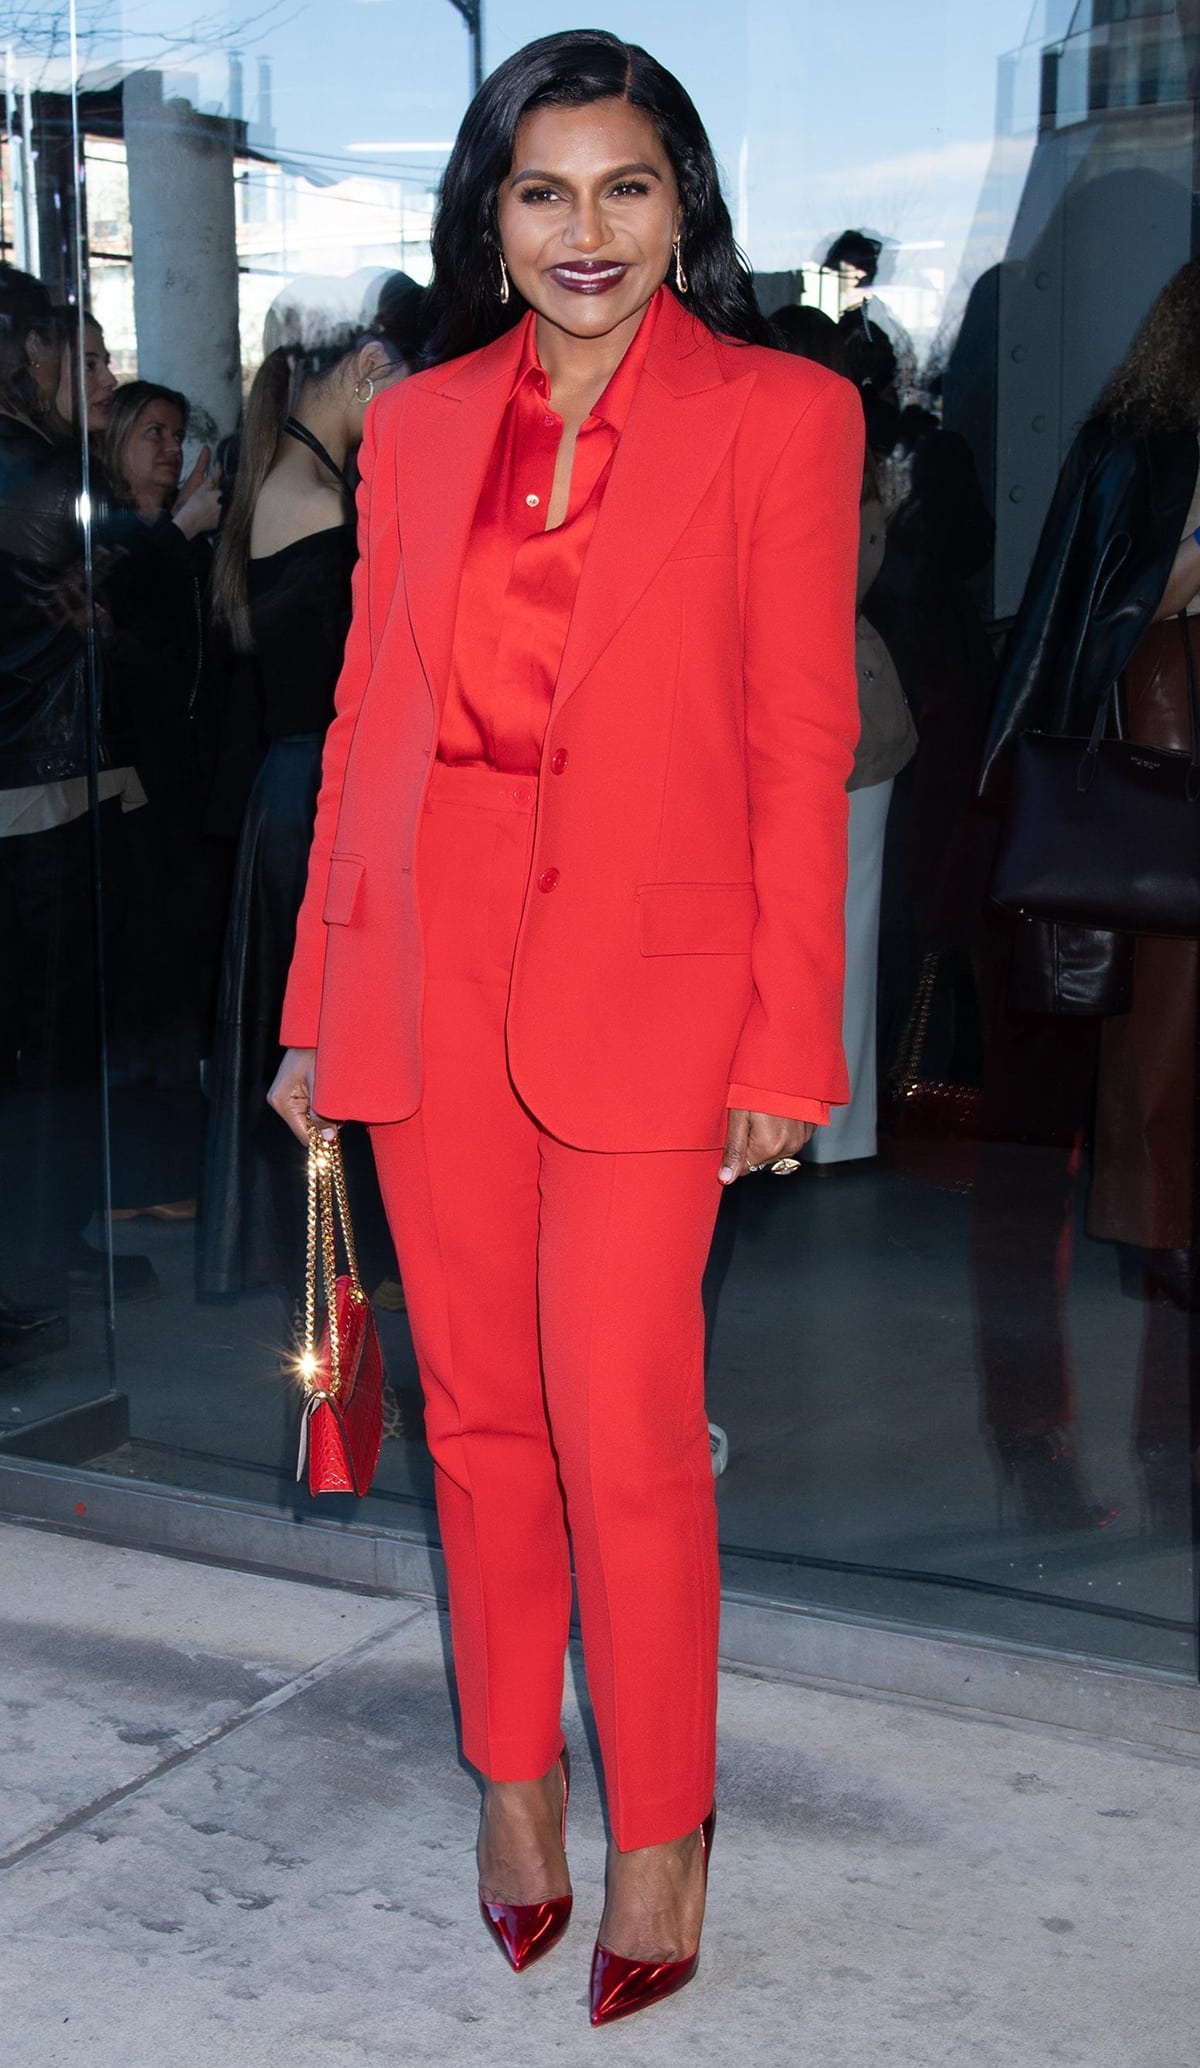 Mindy Kaling, in a bright red monochrome suit and sharp footwear, arrives for the Michael Kors fashion show